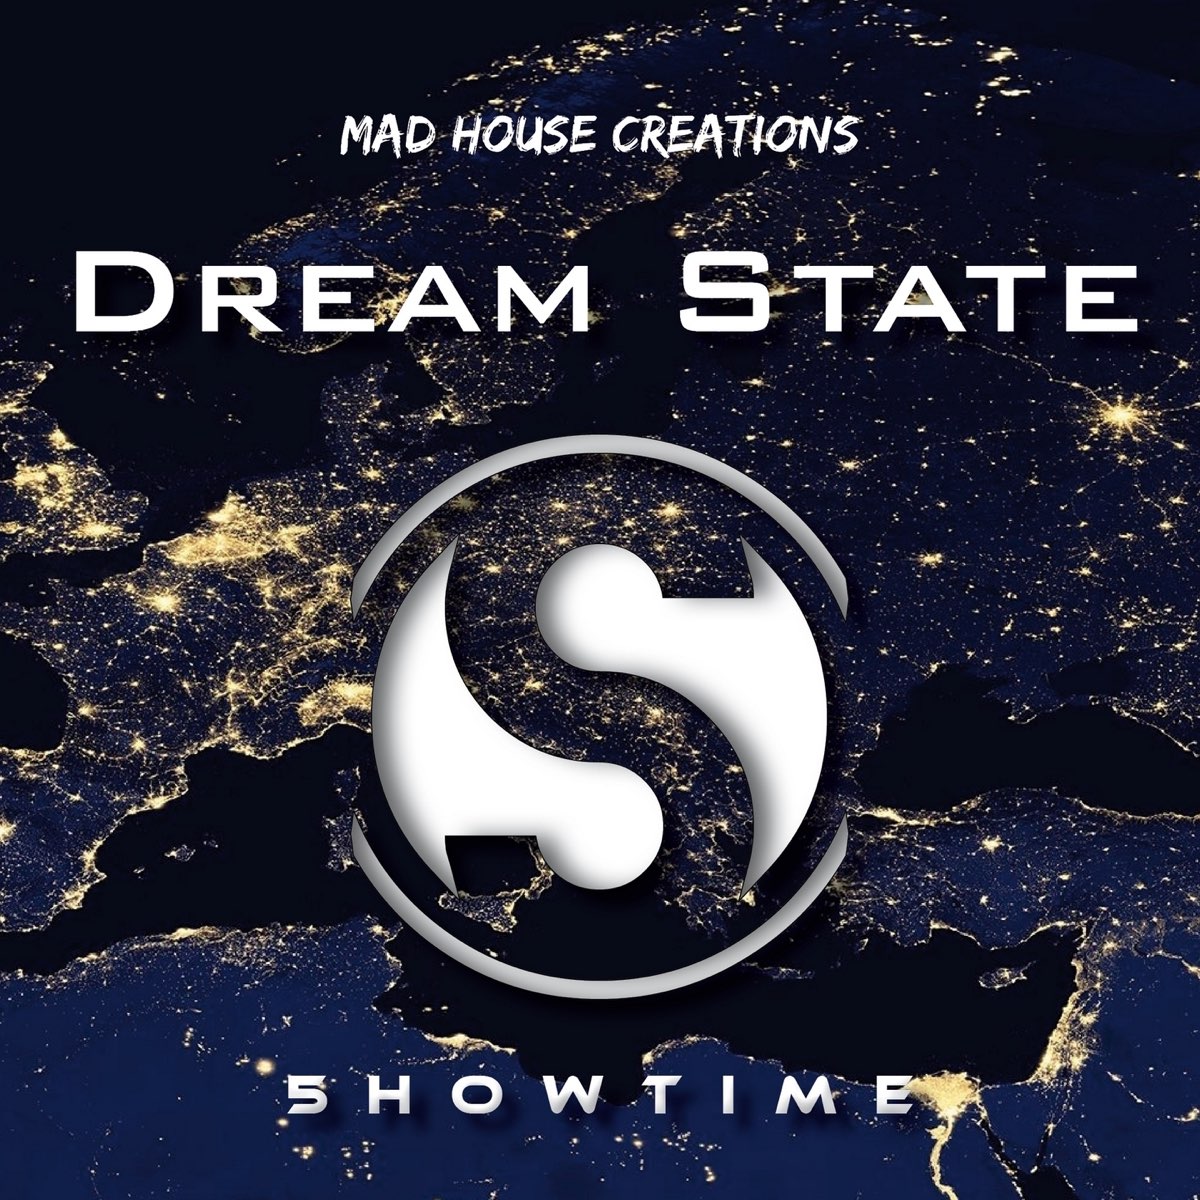 Dream State. Creations музыка. Dream State - Burden. Dream State - Monsters. Single state